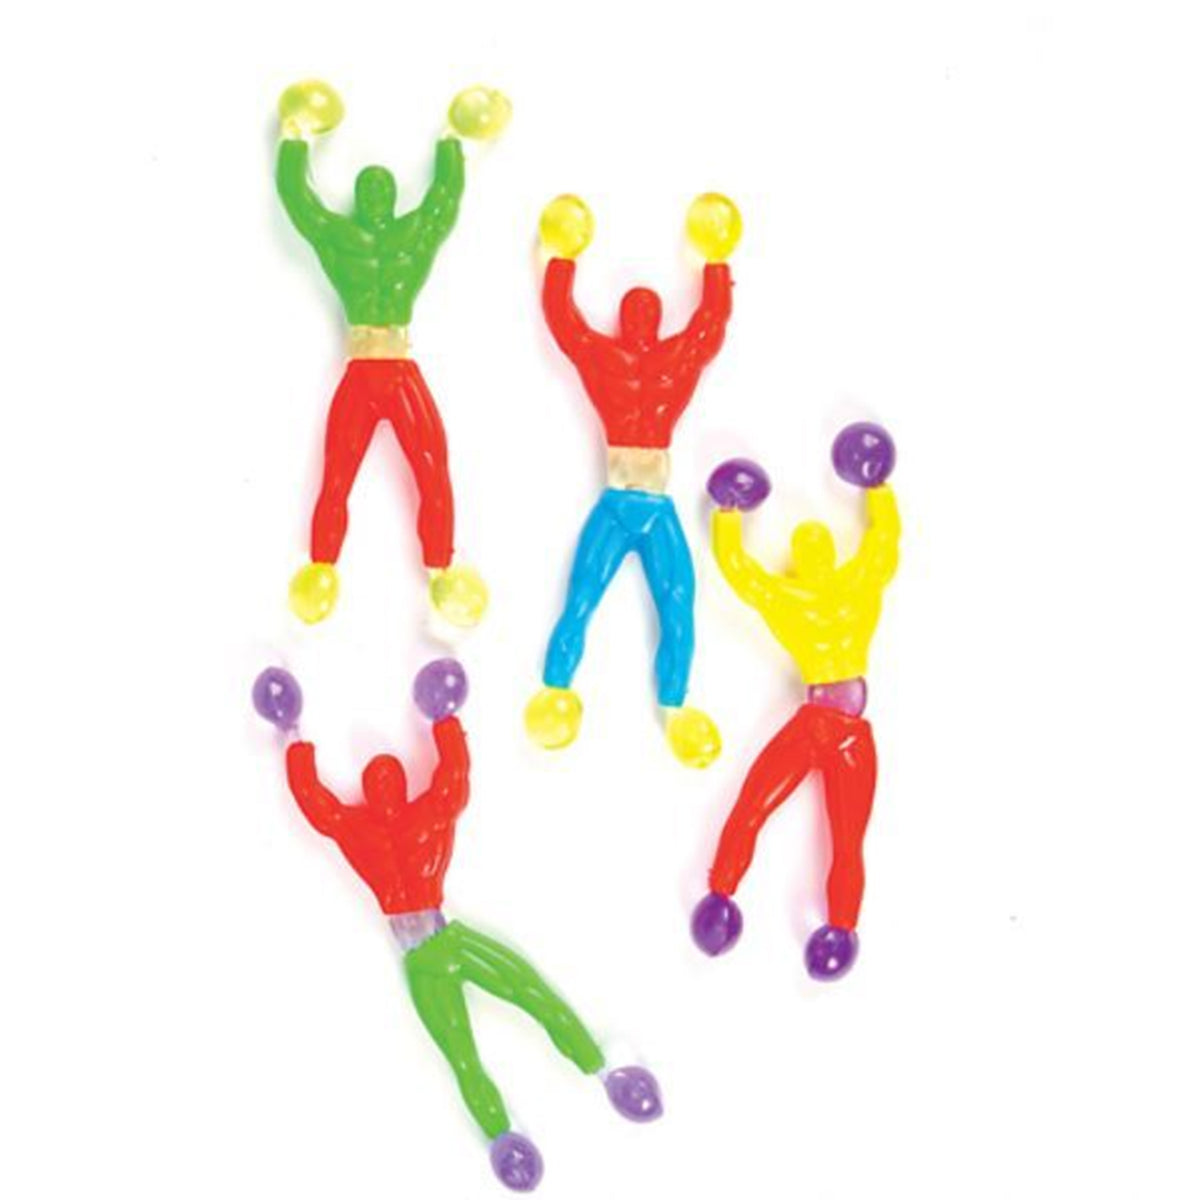 Sticky Wall Climbers Rubber kids Toys In Bulk- Assorted